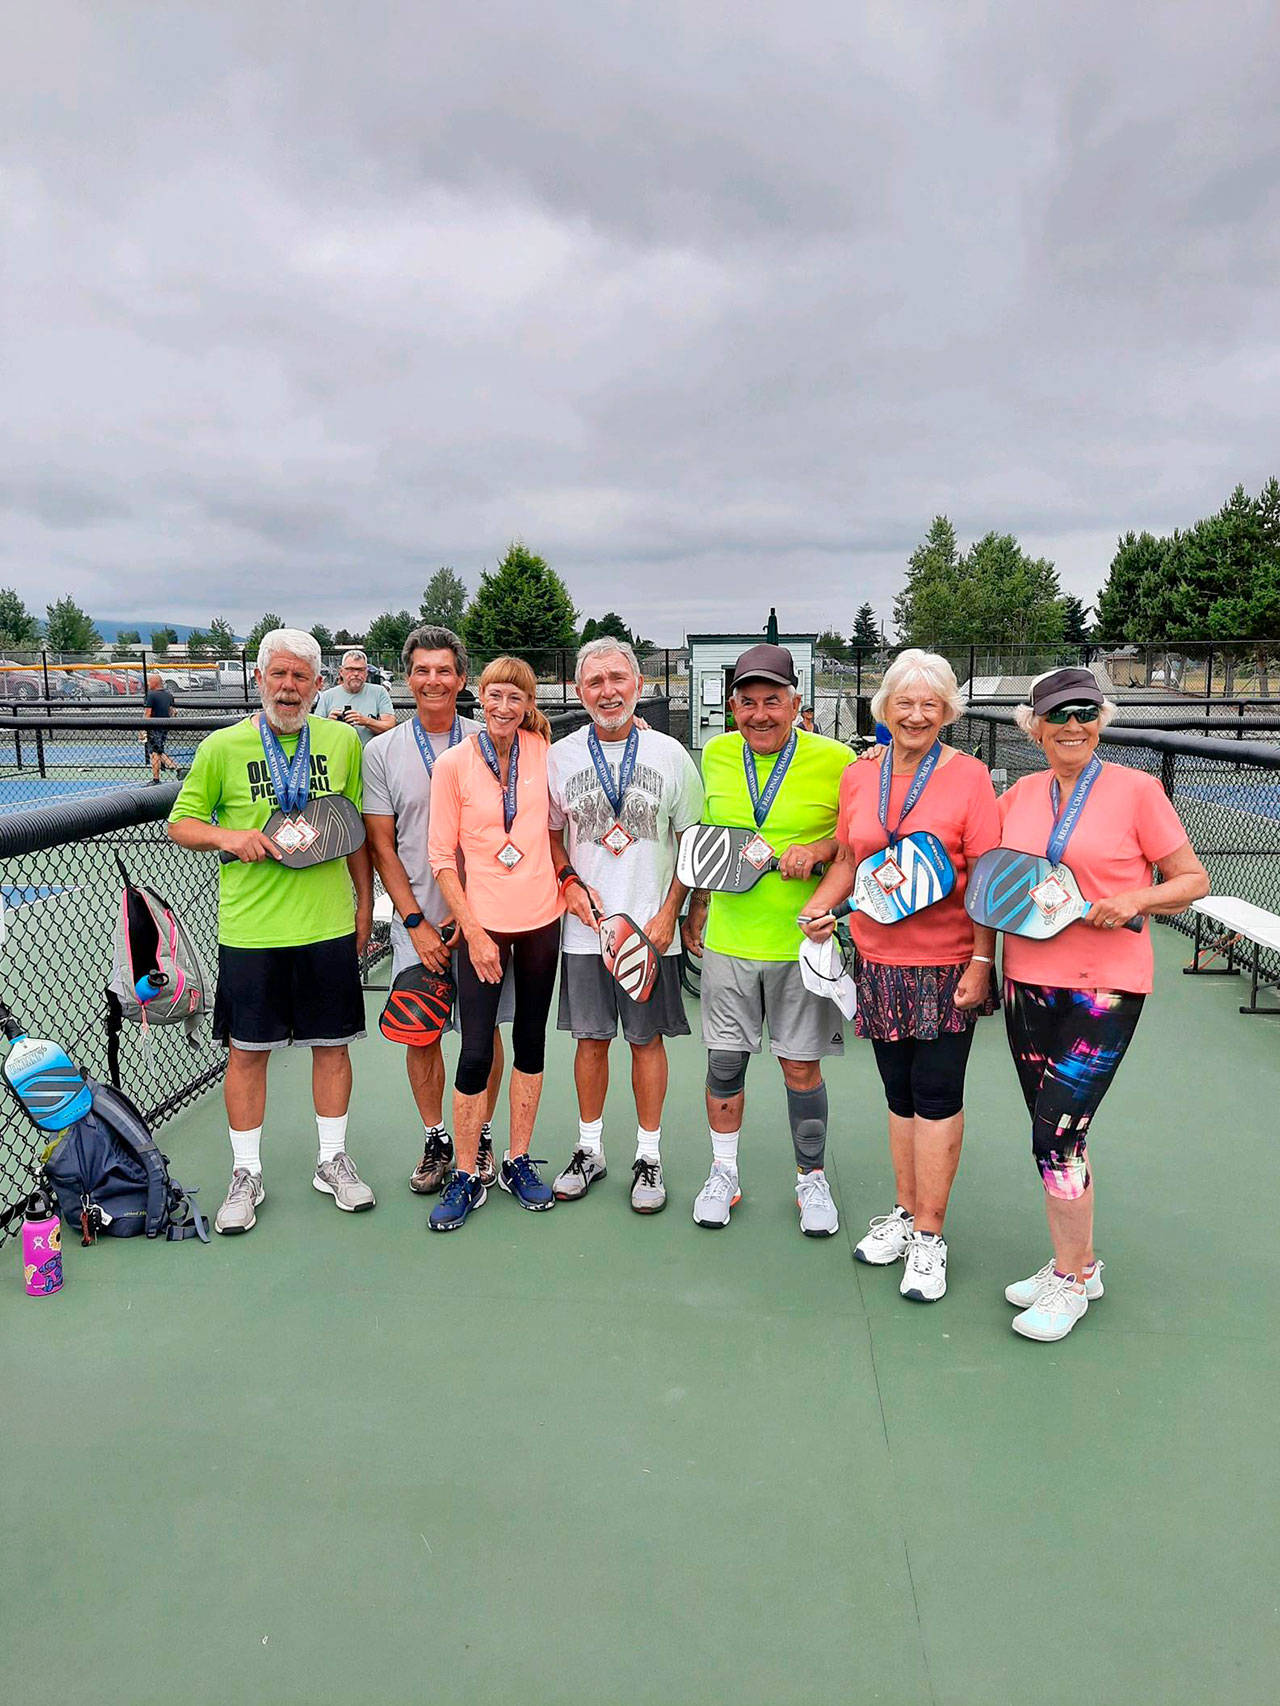 Sequim Picklers members, from left, Steve Bennett, Richard Reed, Colleen Alger, John Herbolt, Bob Sester, Jeannie Ramsey and Beverly Hoffman were part of 14-strong Sequim Picklers contingent that competed at the 2021 USA Pickleball Pacific Northwest Regional Championship in Boise, Idaho, last month.
Sequim Picklers members from left, Steve Bennett, Richard Reed, Colleen Alger, John Herbolt, Bob Sester, Jeannie Ramsey and Beverly Hoffman were part of 14-strong Sequim Picklers contingent that competed at the 2021 USA Pickleball Pacific Northwest Regional Championship in Boise, Idaho, last month.